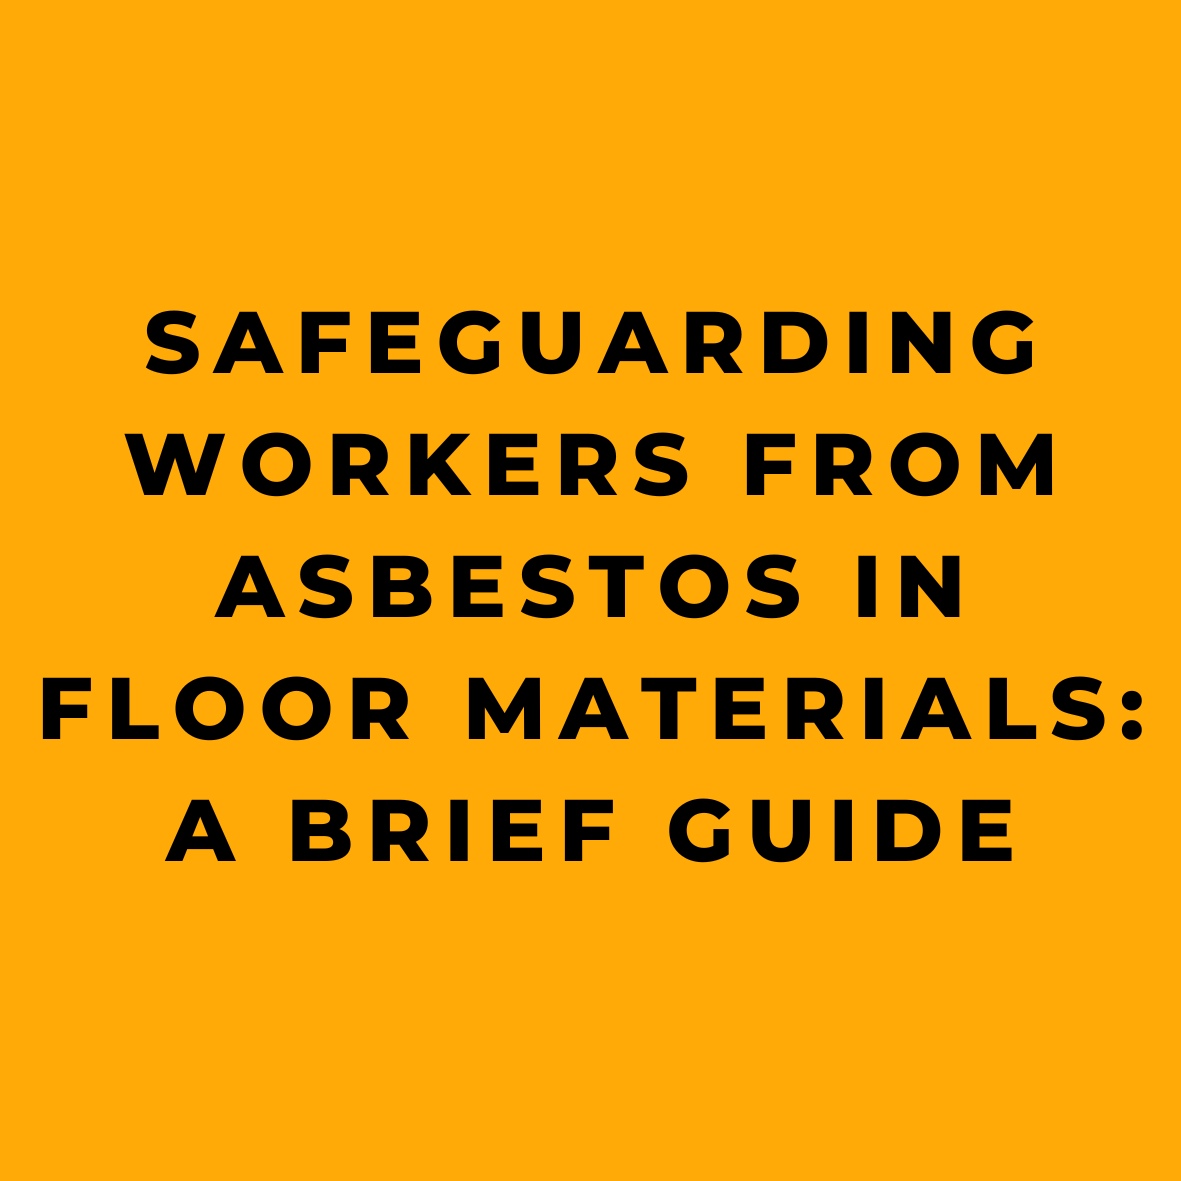 Safeguarding Workers from Asbestos in Floor Materials A Brief Guide